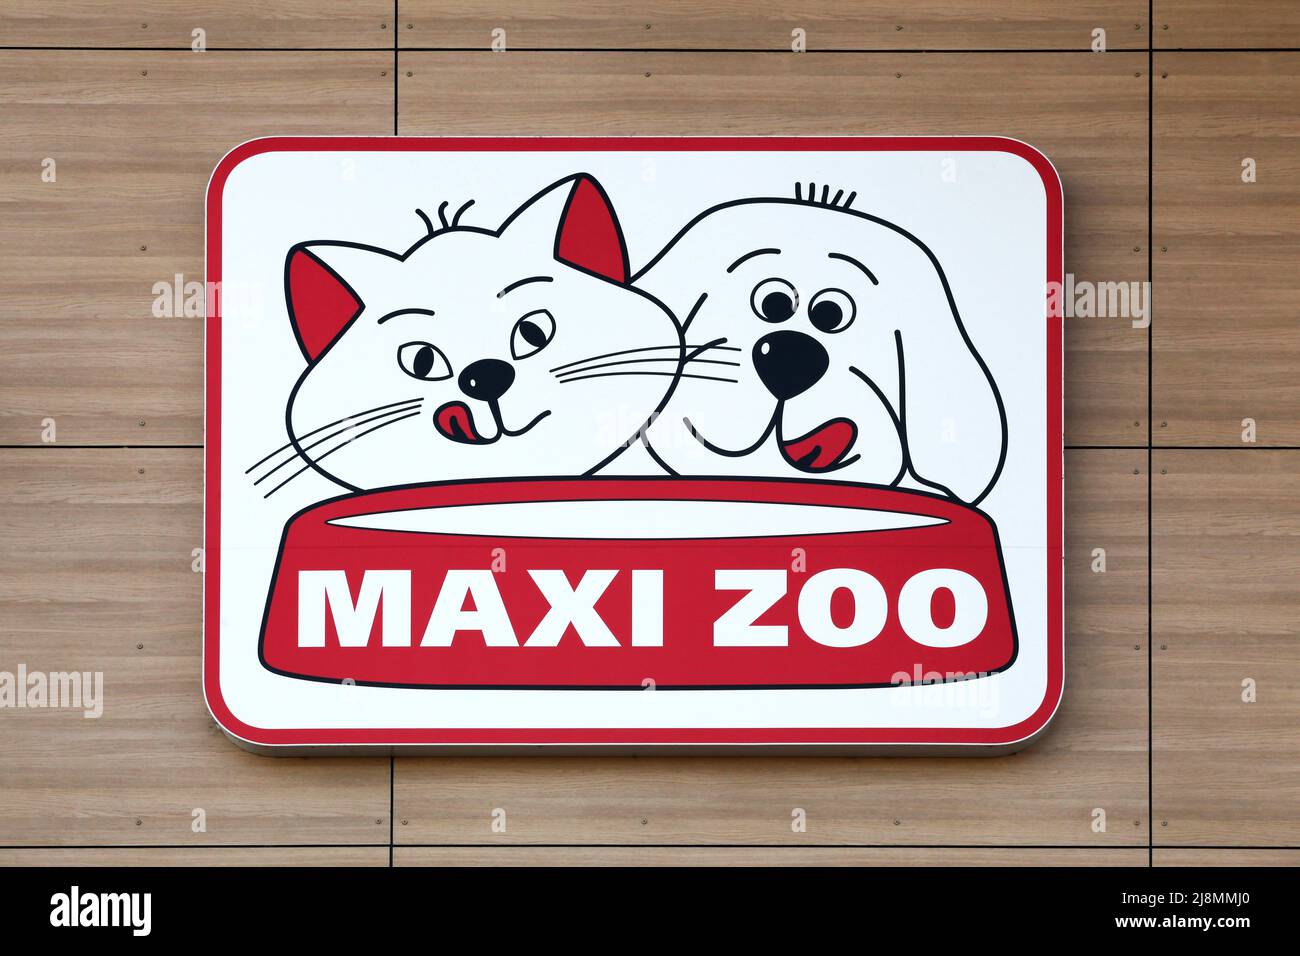 Villefranche, France - March 8, 2020: Maxi Zoo is a German franchise company for pet food Stock Photo